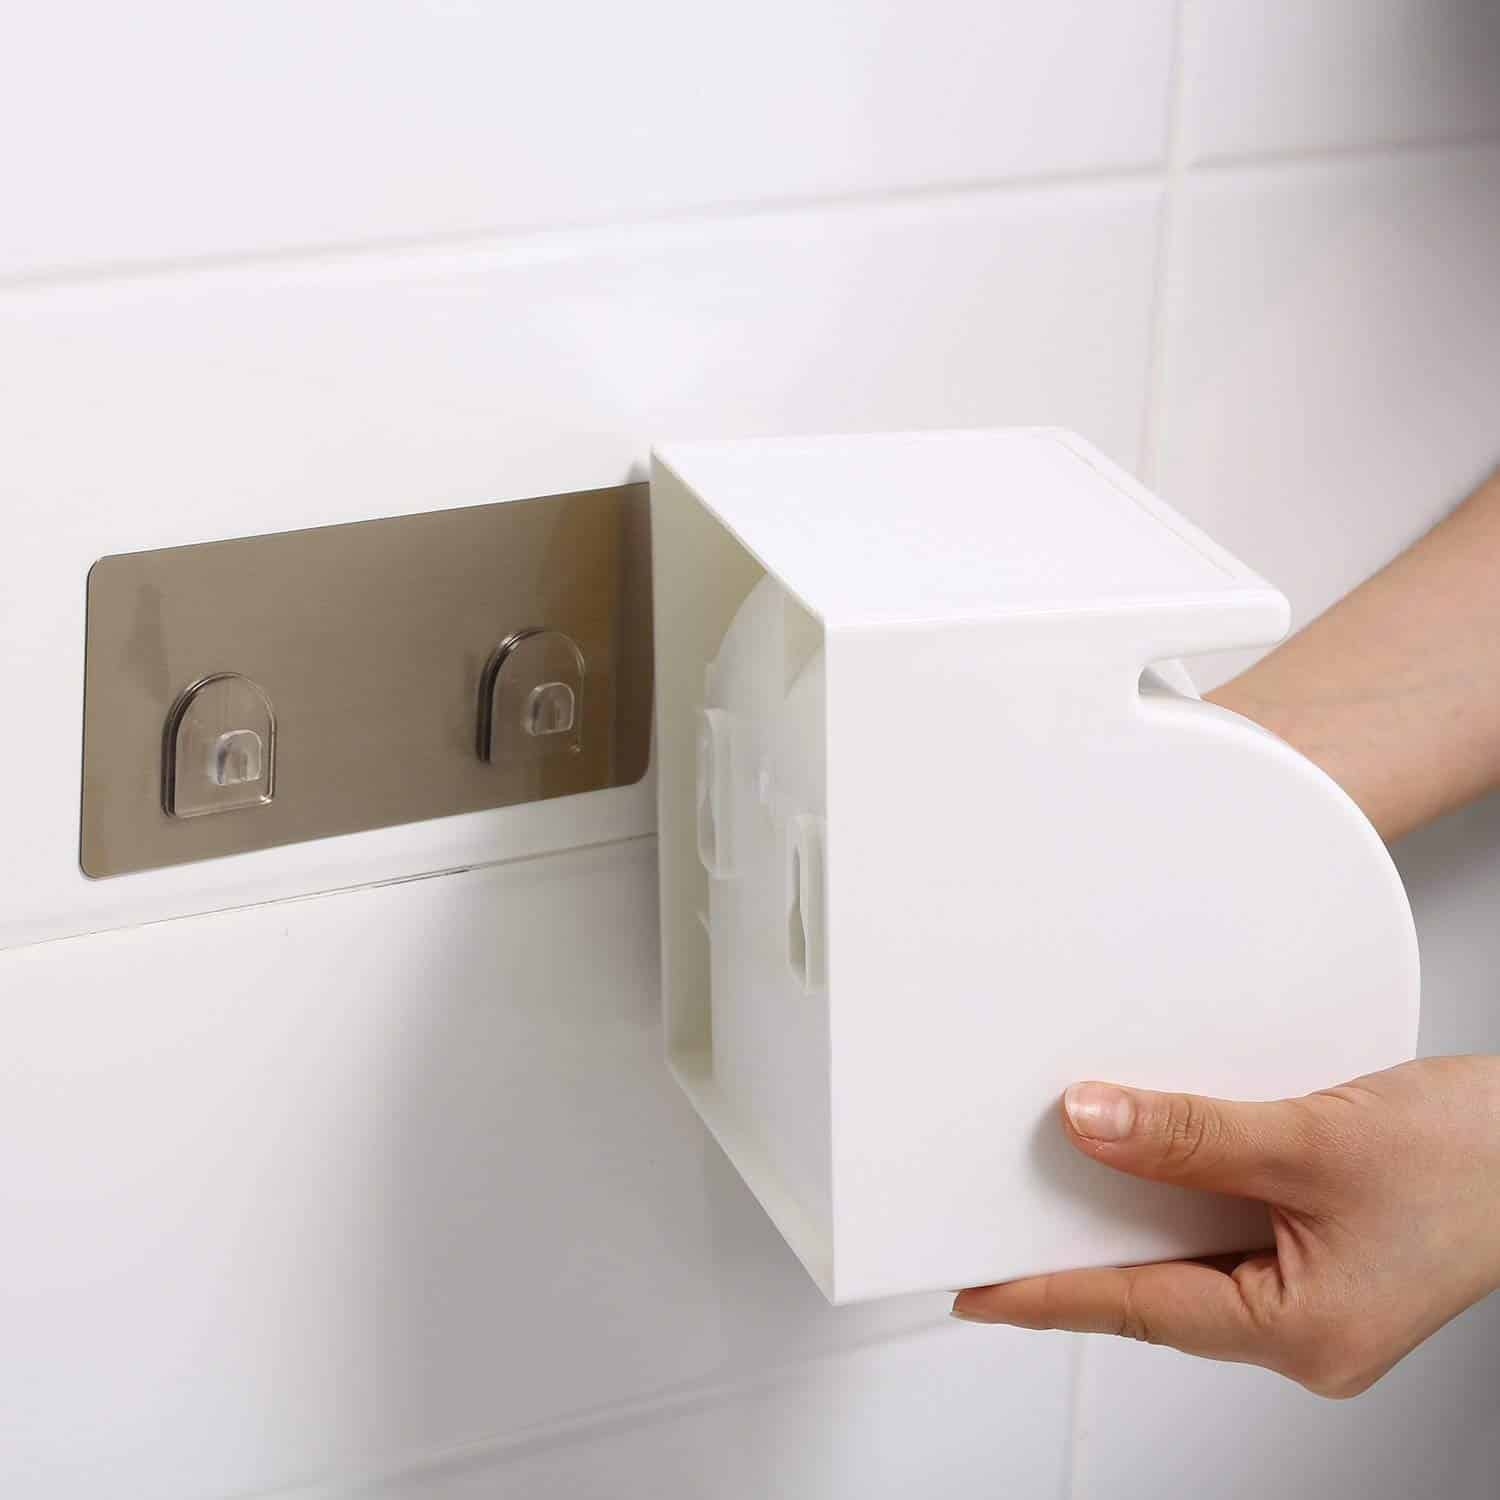 Magic-Sticker-Series-Toilet-Paper-Holder-in-Bathroom-with-Mobile-Stand